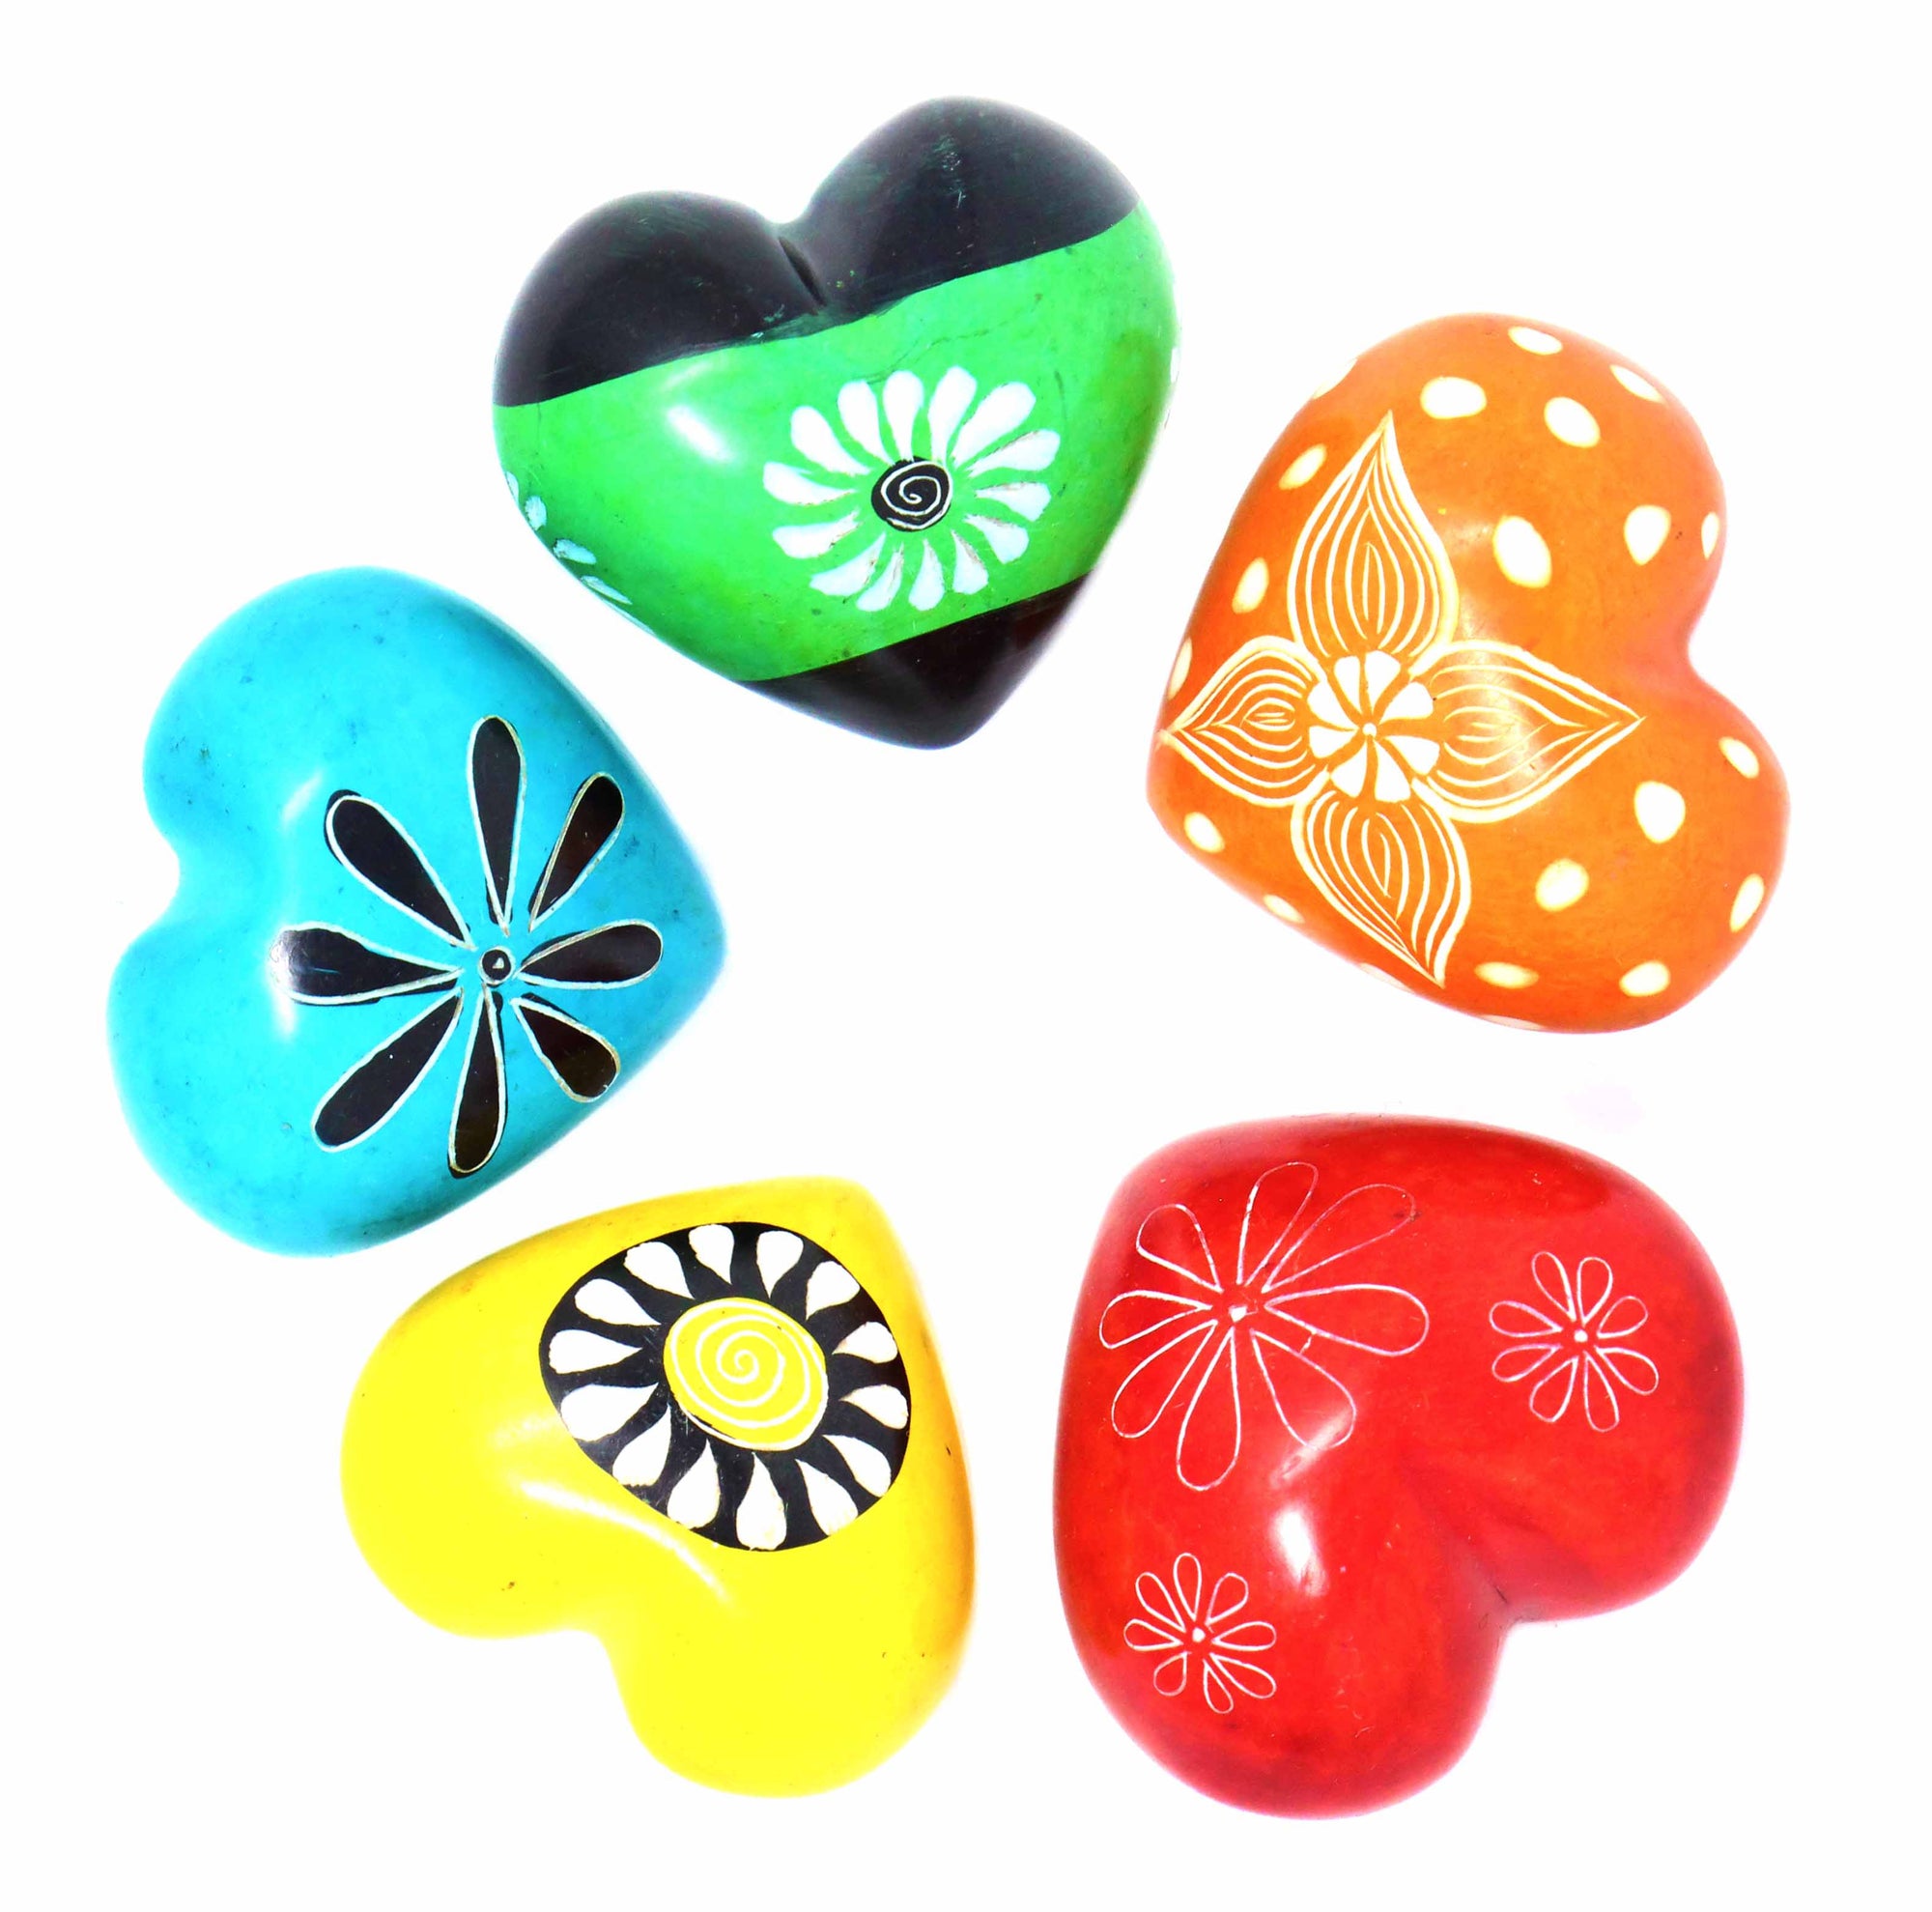 10-Pack - Soapstone Hearts - 1.5-inch - Assorted Colors with Designs